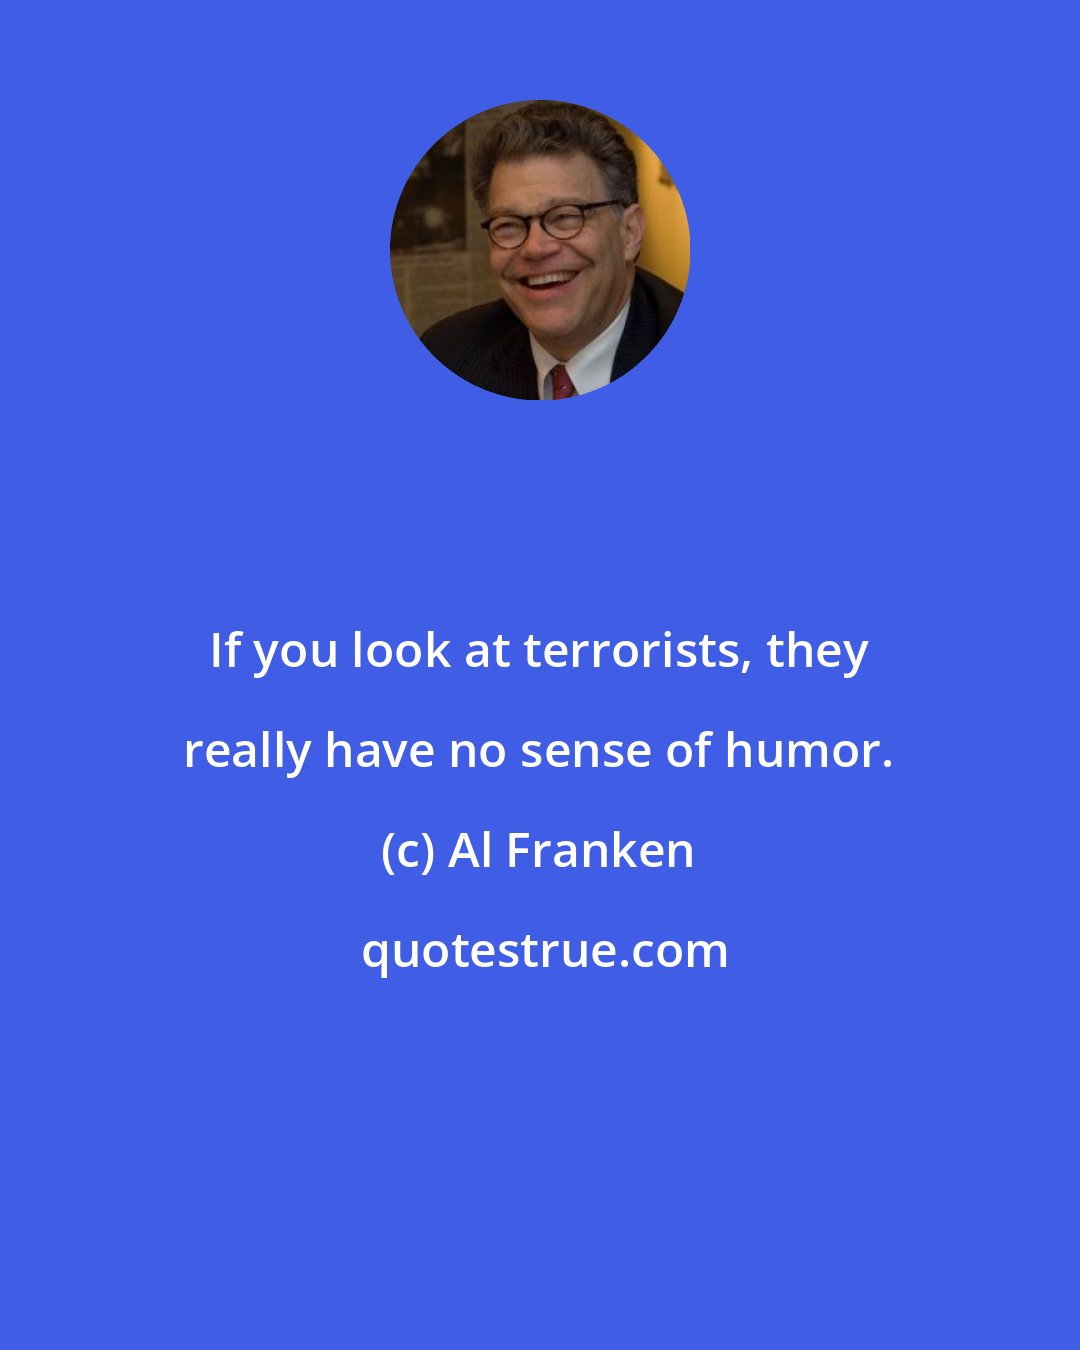 Al Franken: If you look at terrorists, they really have no sense of humor.